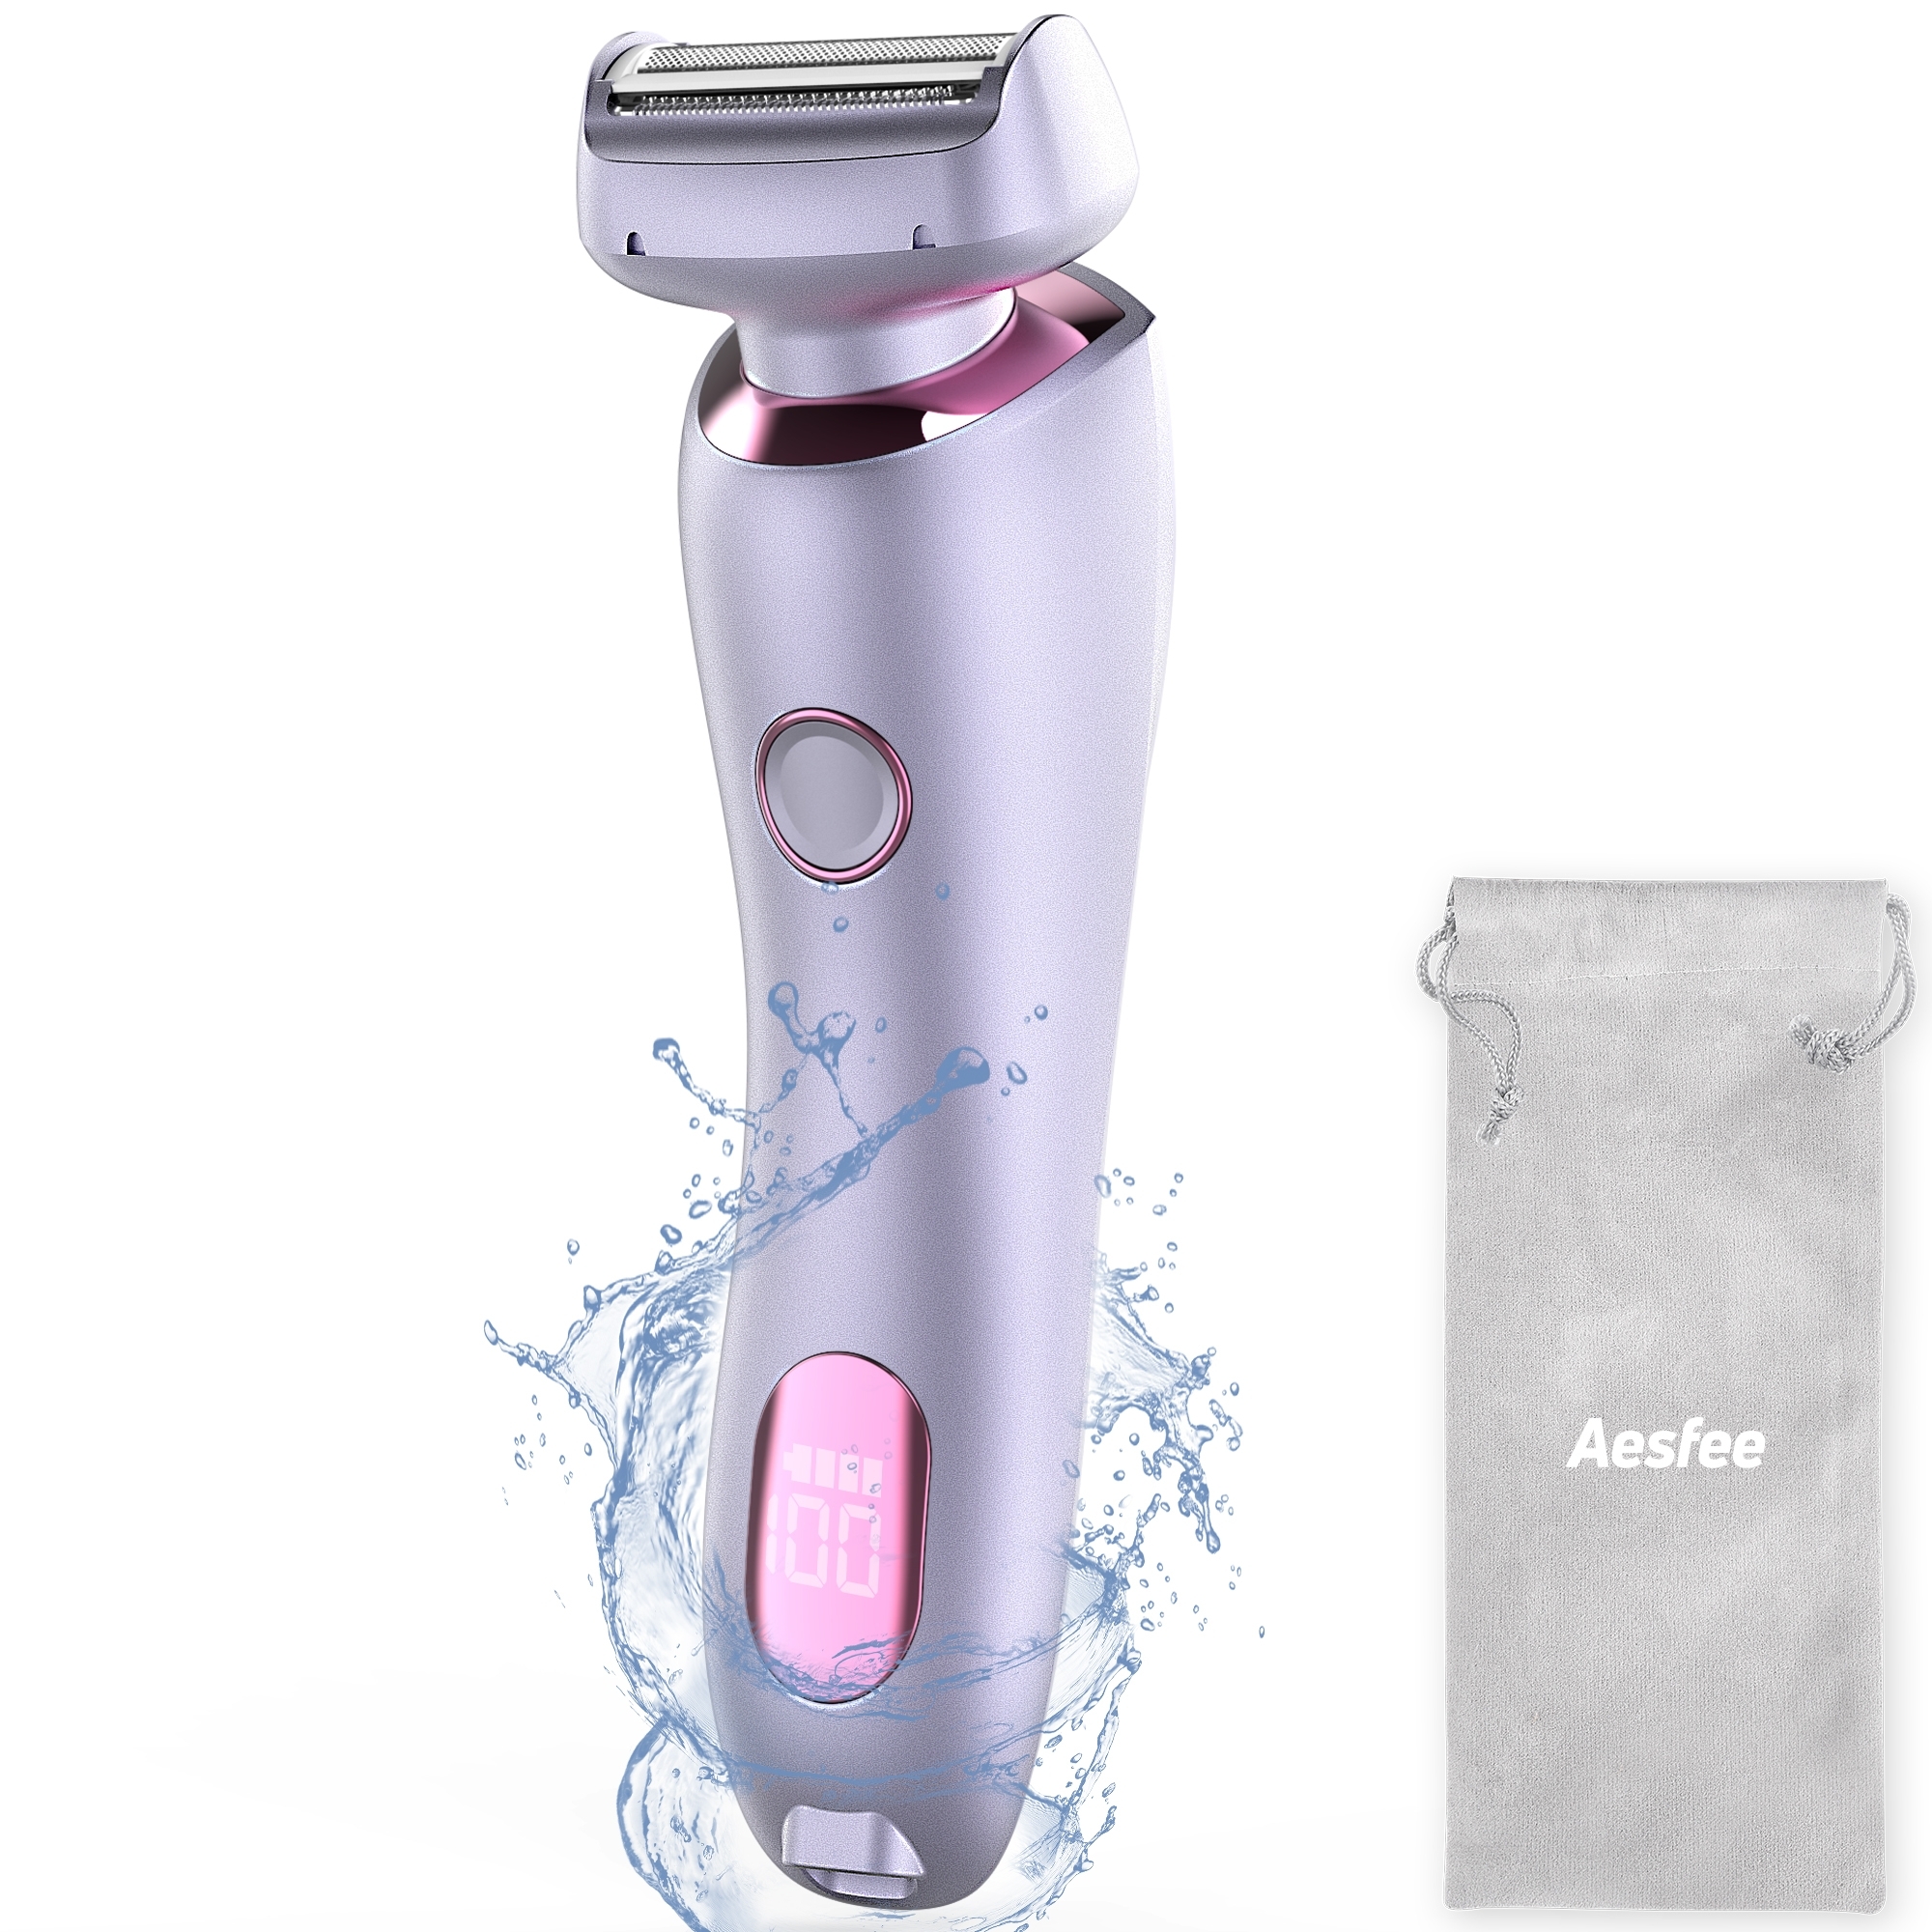 Electric Shaver for Women Legs, Womens Electric Razor for Legs Underarms Bikini Public Hair Wet or Dry, Portable Ladies Body Hair Trimmer Rechargeable